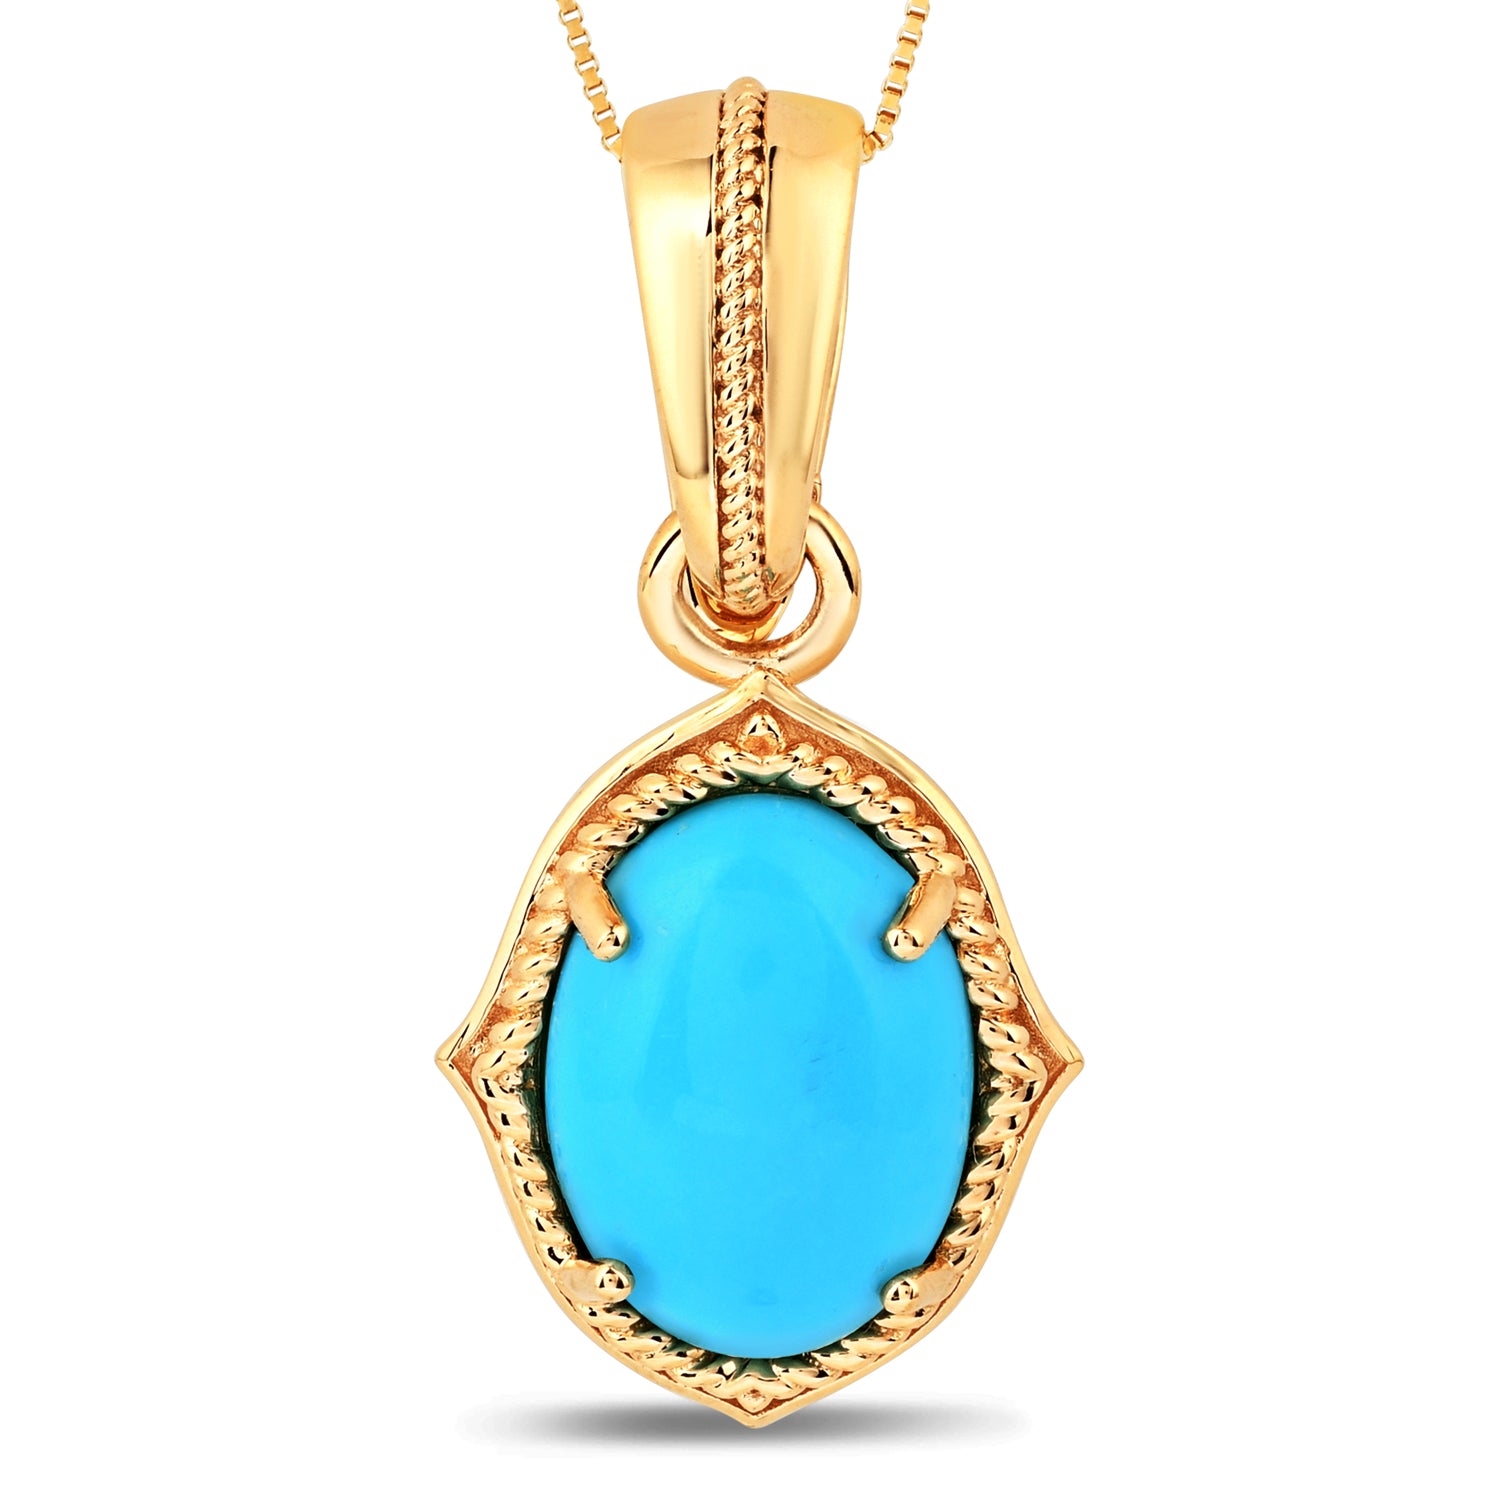 Women's 14K Yellow Gold Sleeping Beauty Turquoise Necklace